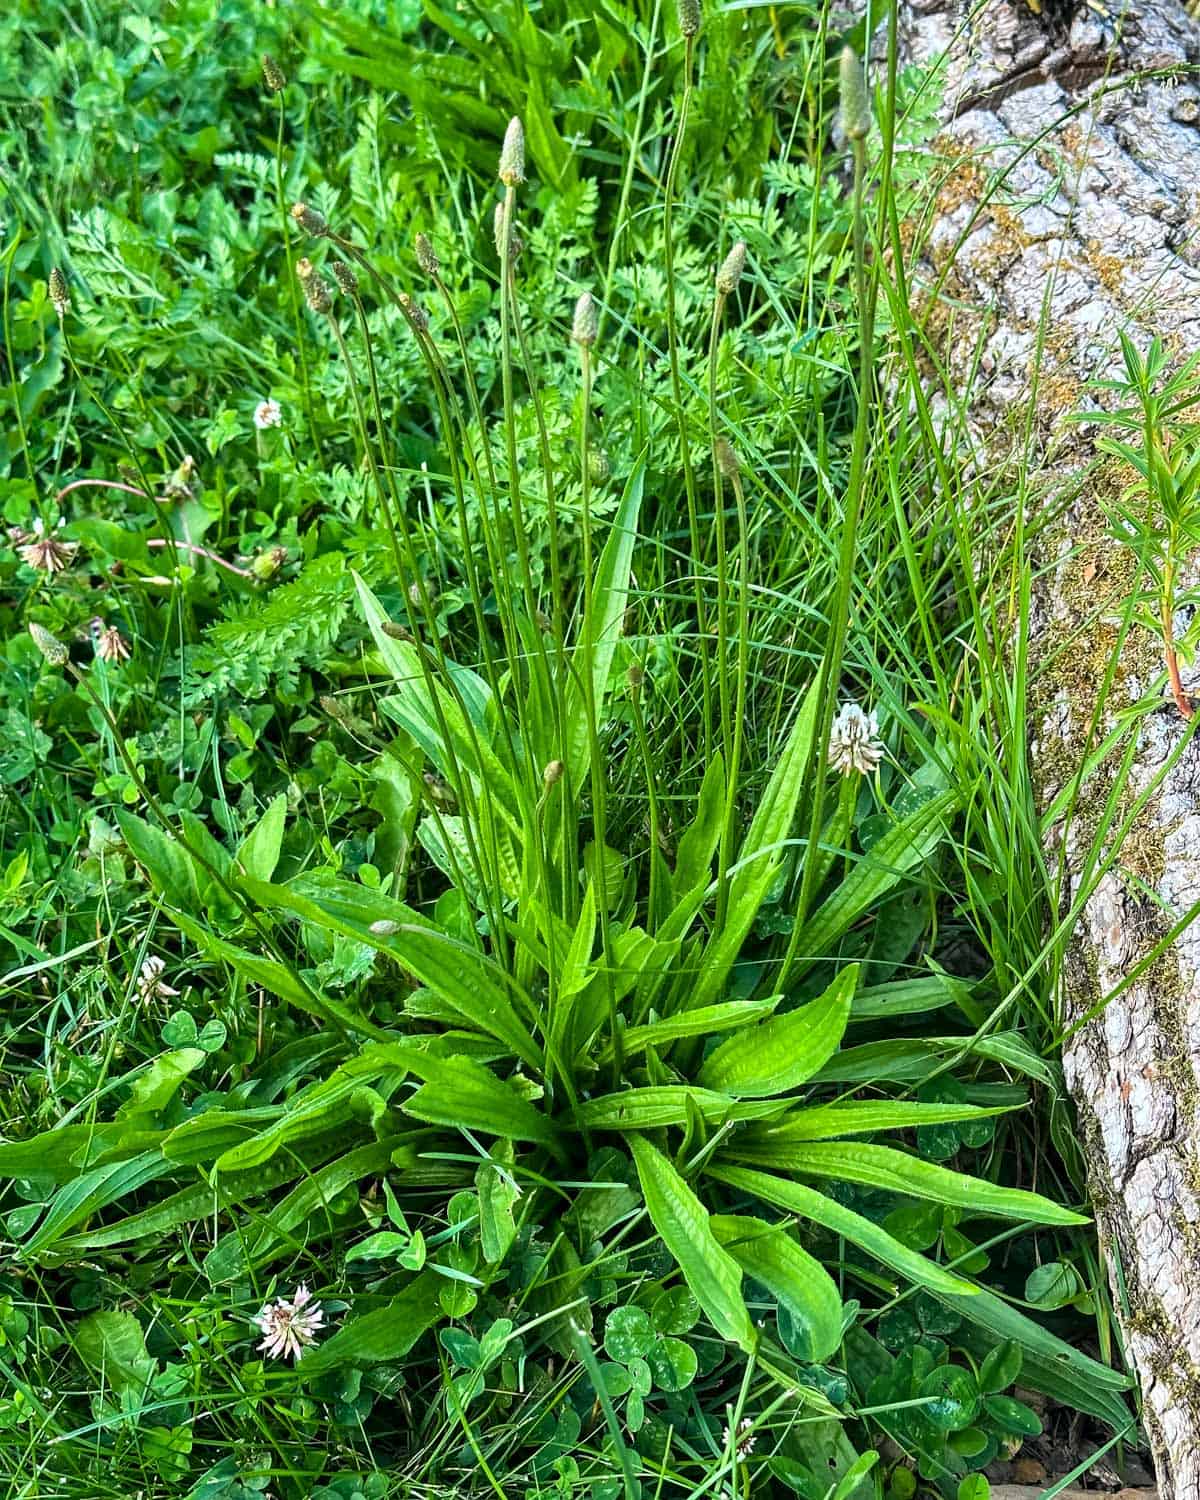 Narrow leaf plantain growing in a green grassy area.